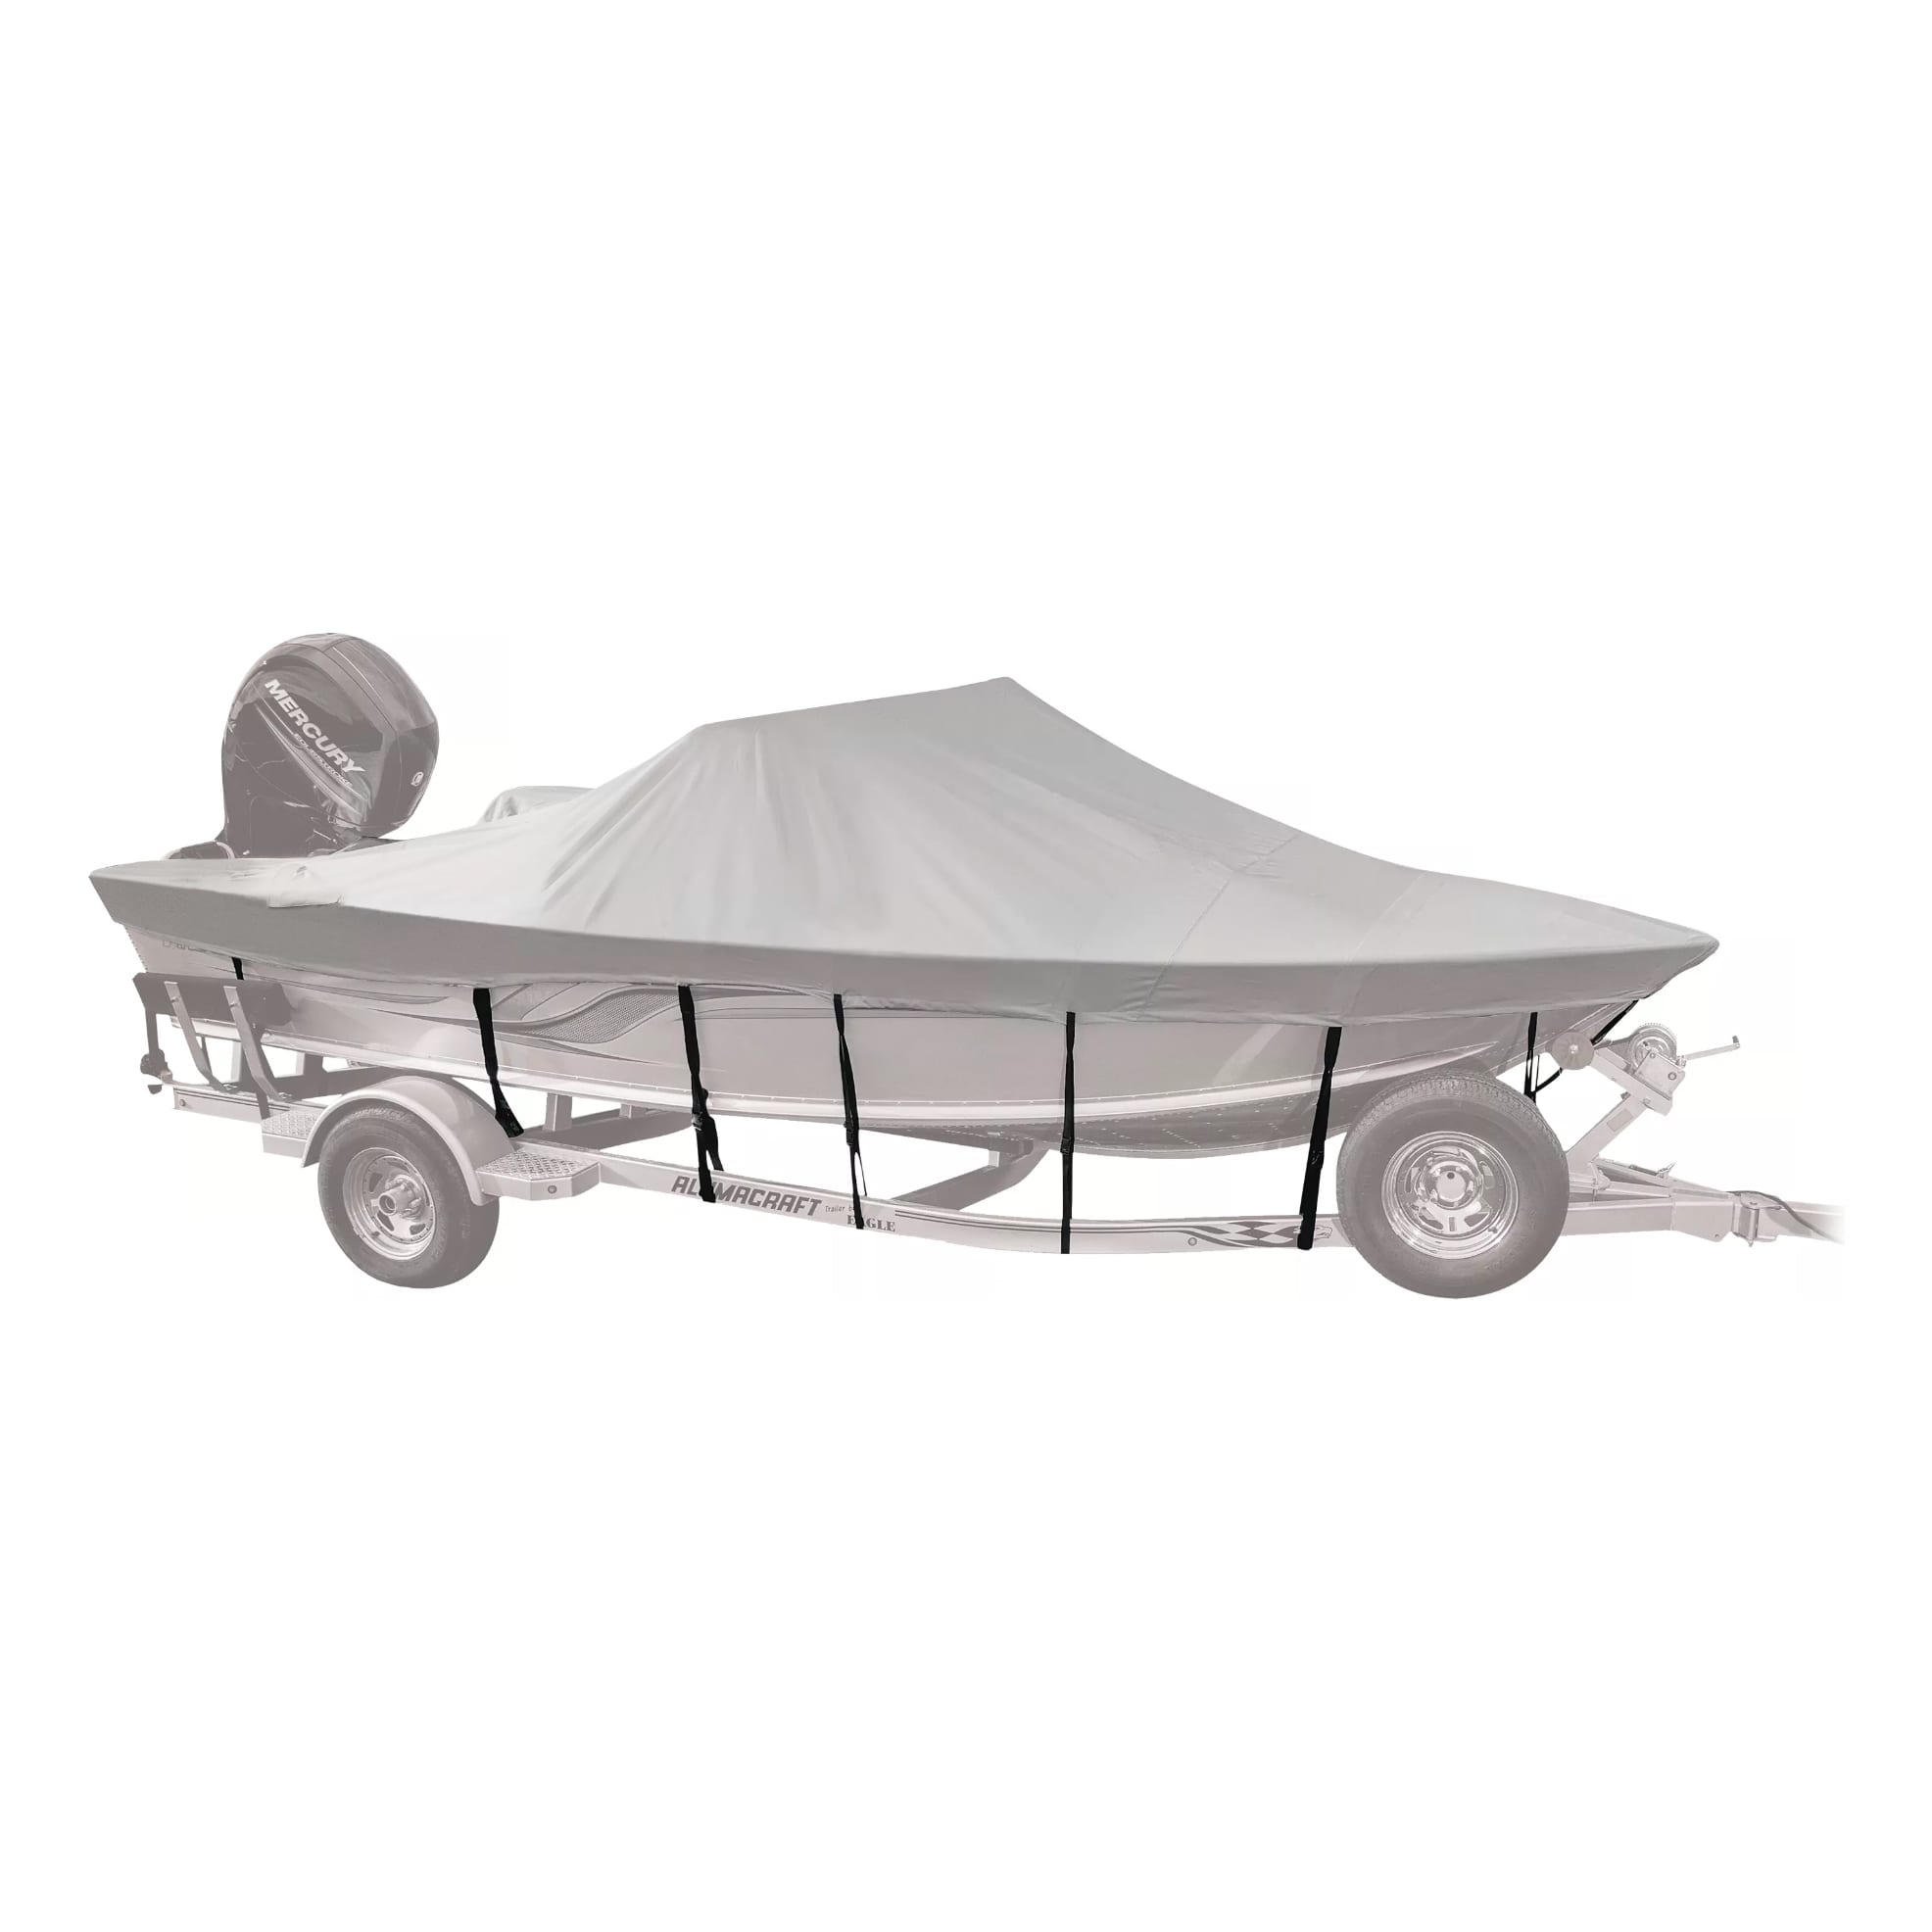 Bass Pro Shops® RSS V-Hull Outboard Boat Cover